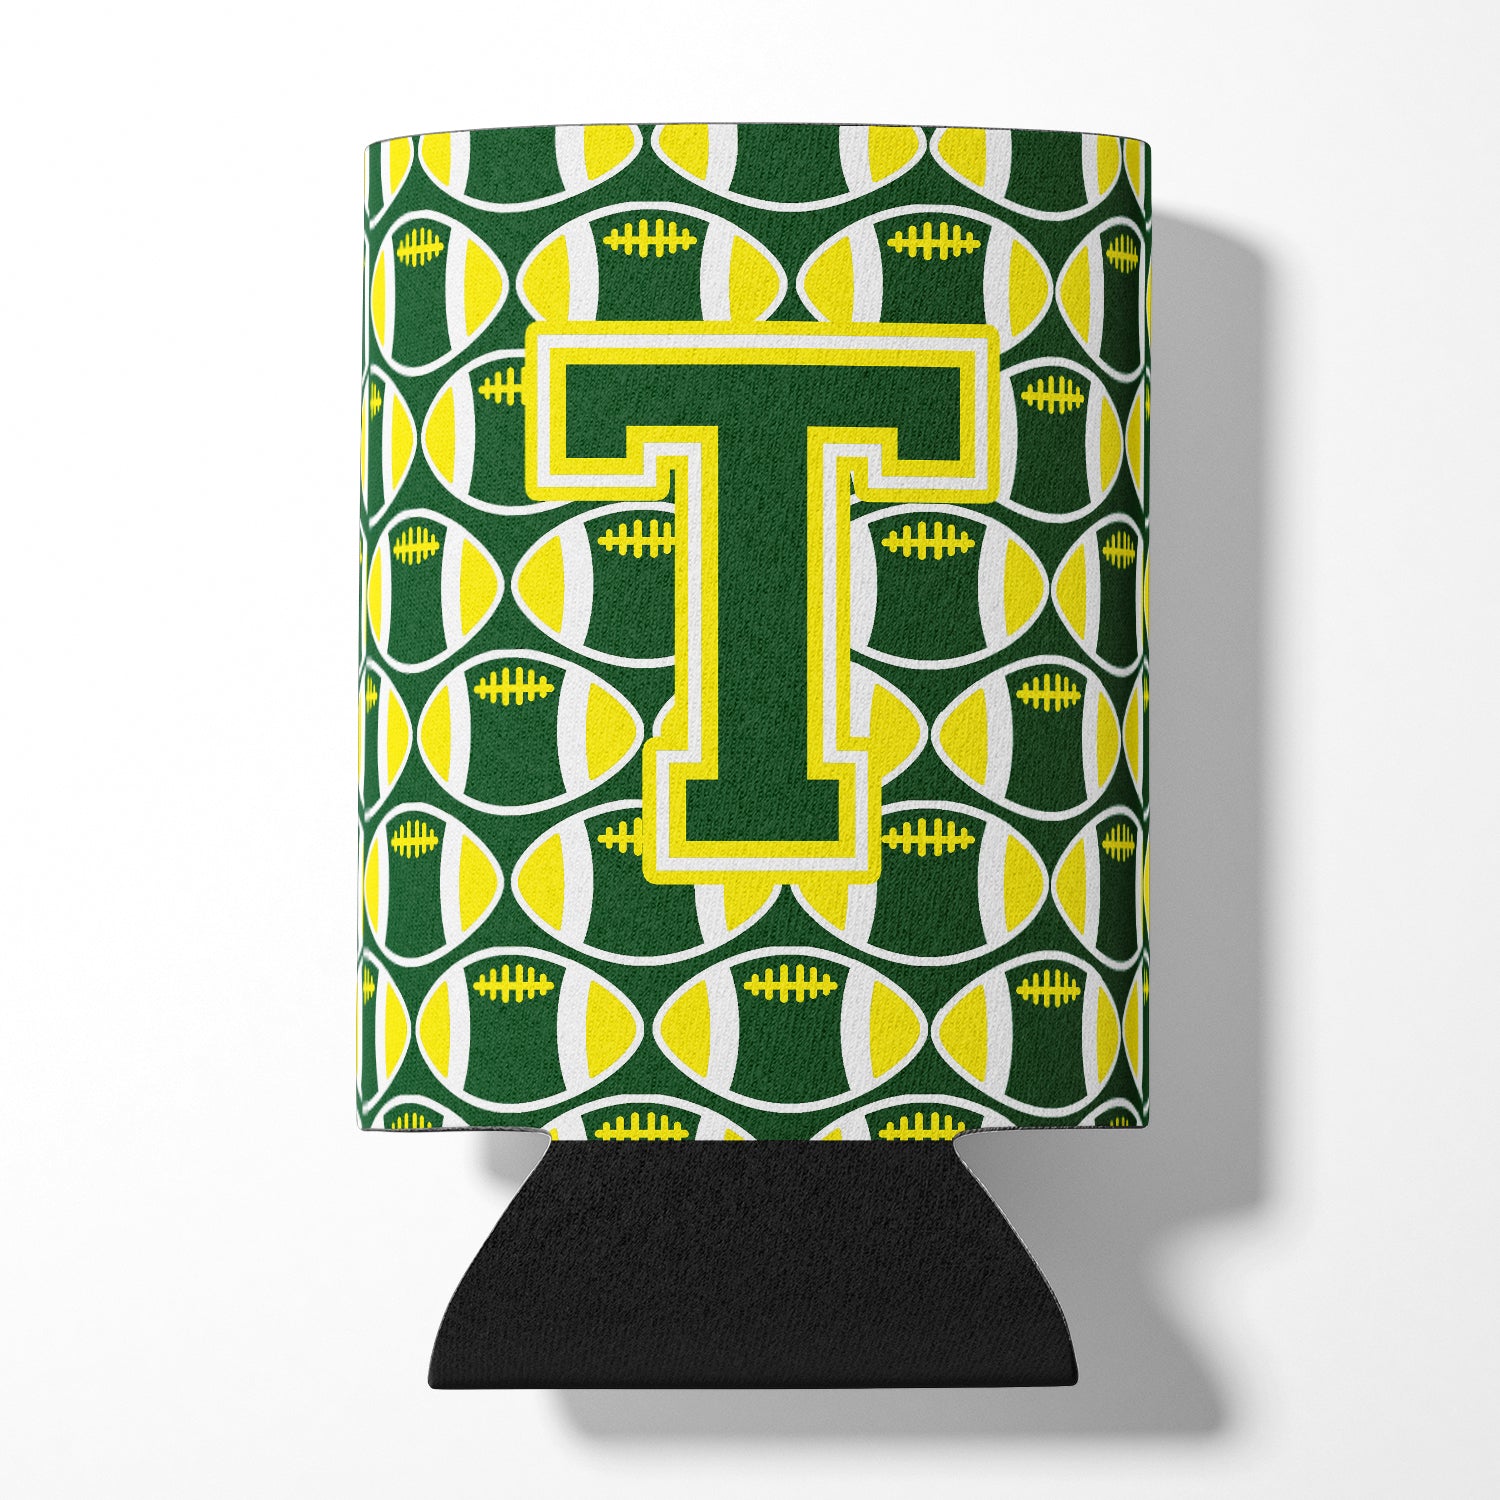 Letter T Football Green and Yellow Can or Bottle Hugger CJ1075-TCC.